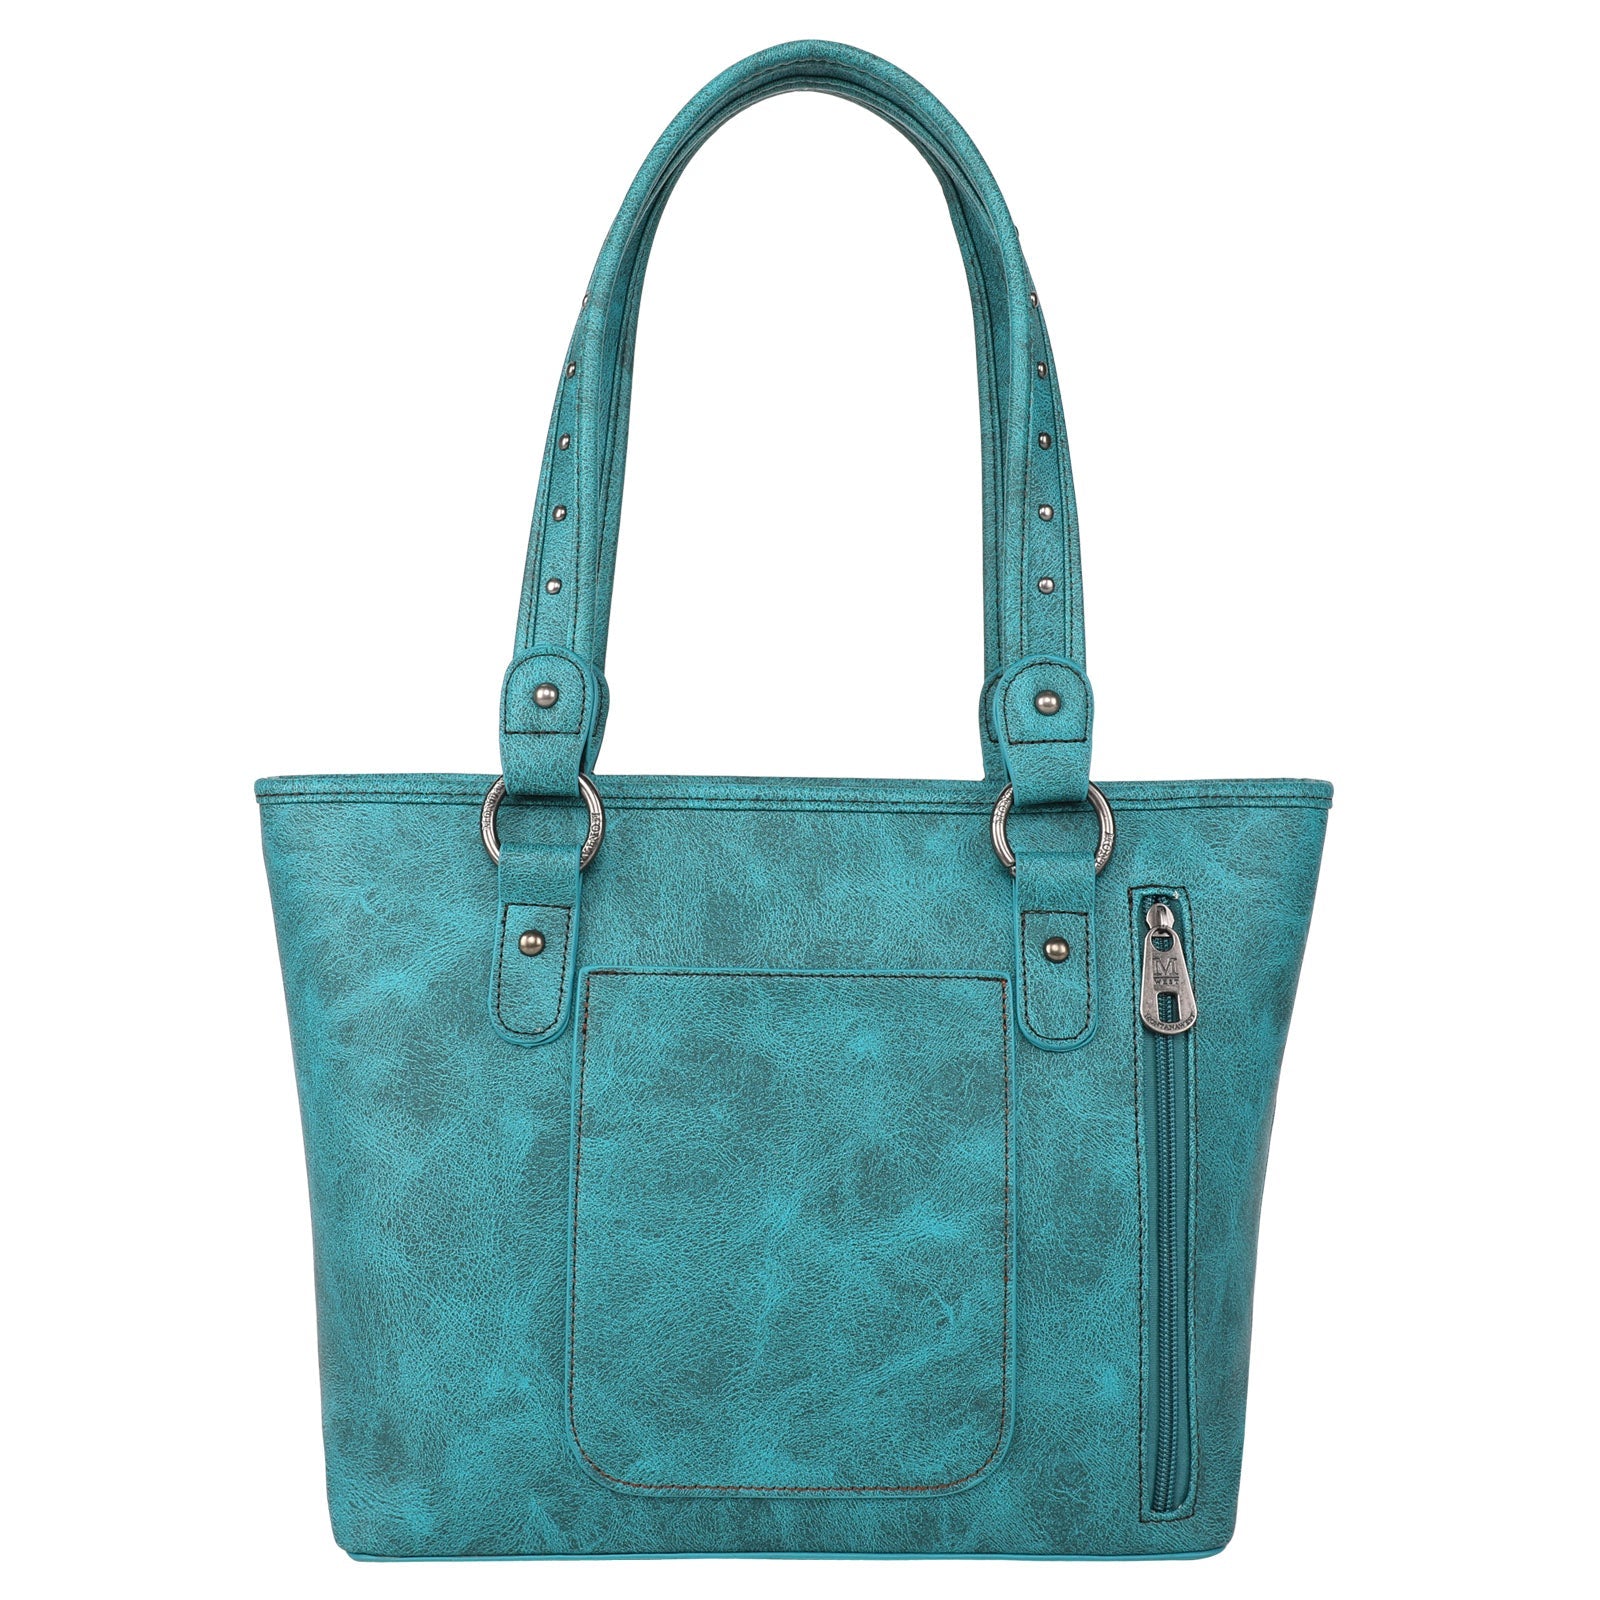 Montana West Whipstitch Collection Concealed Carry Tote - Cowgirl Wear